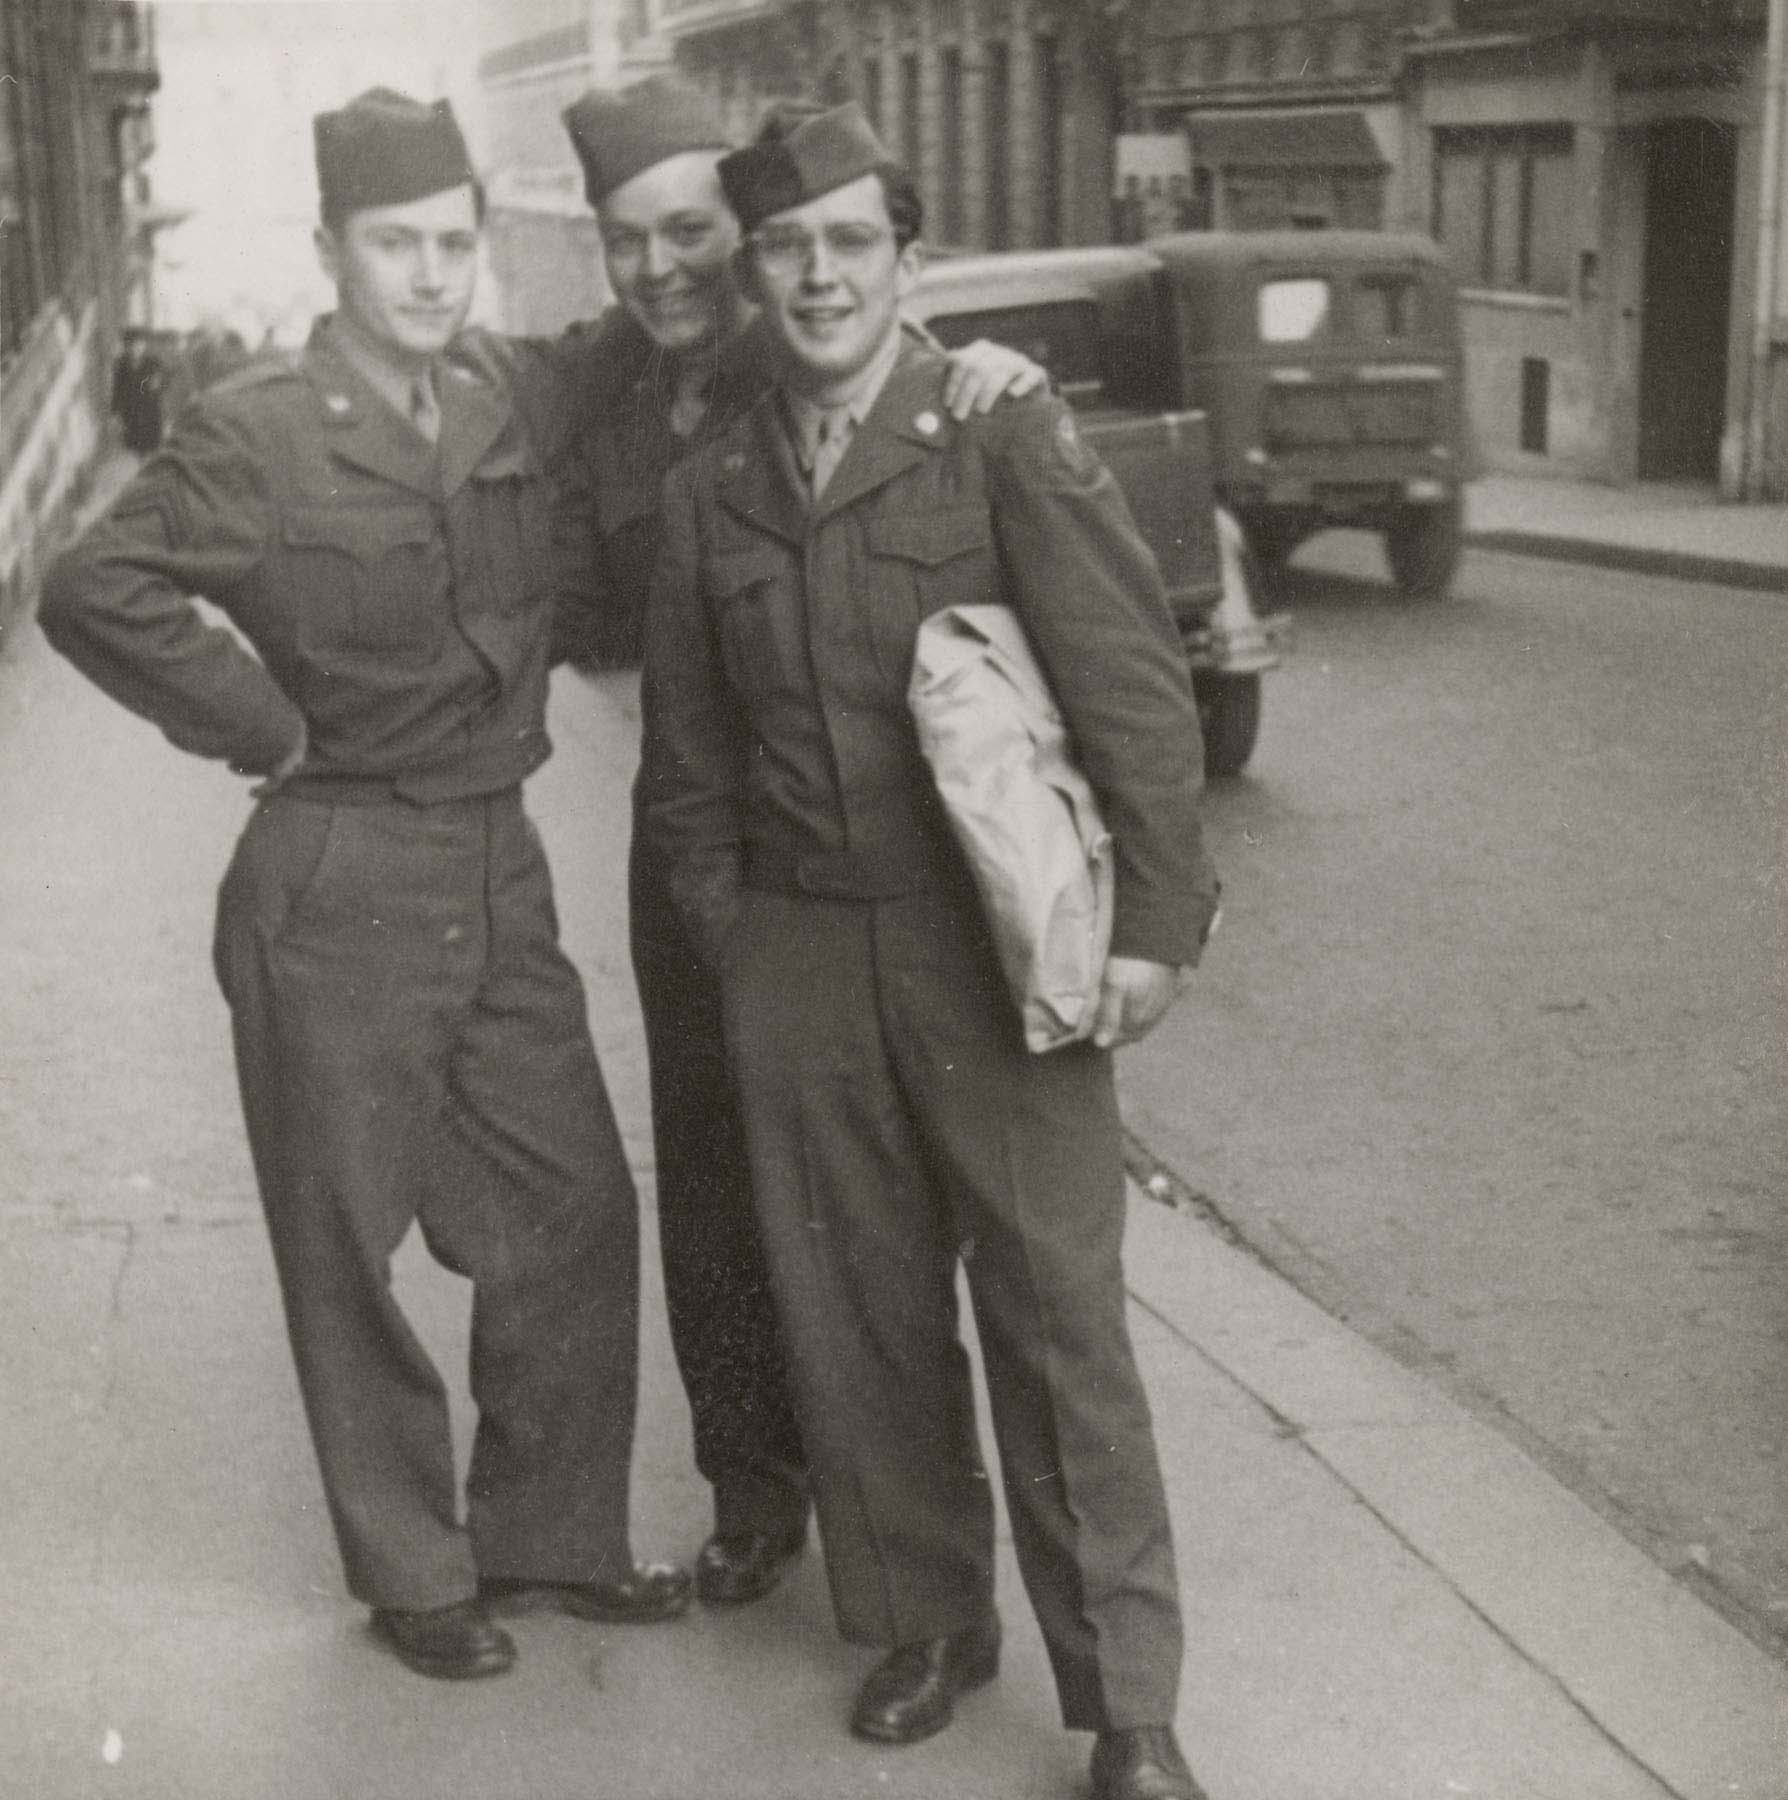 A black-and-white photograph of three male soldiers standing together on a city street.